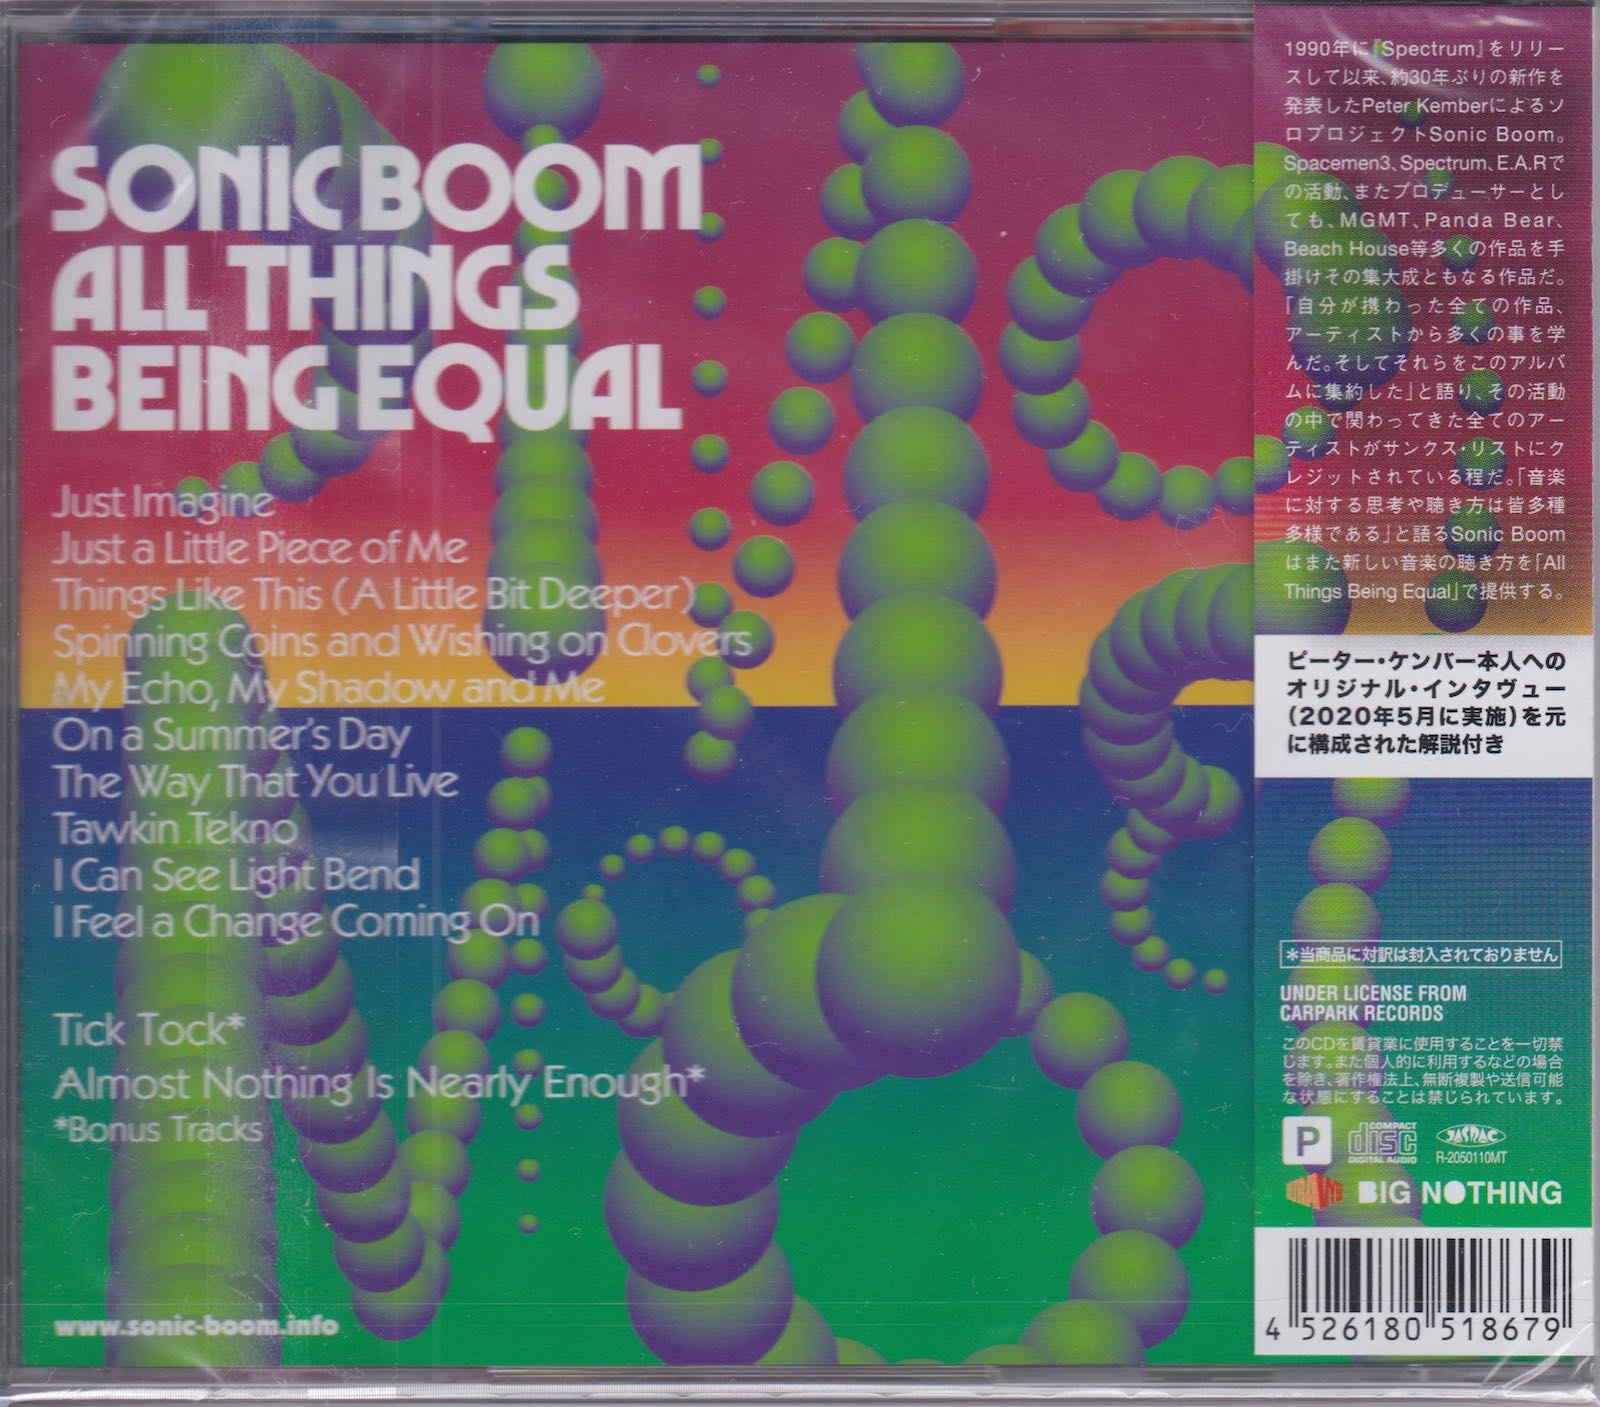 Sonic Boom - All Things Being Equal